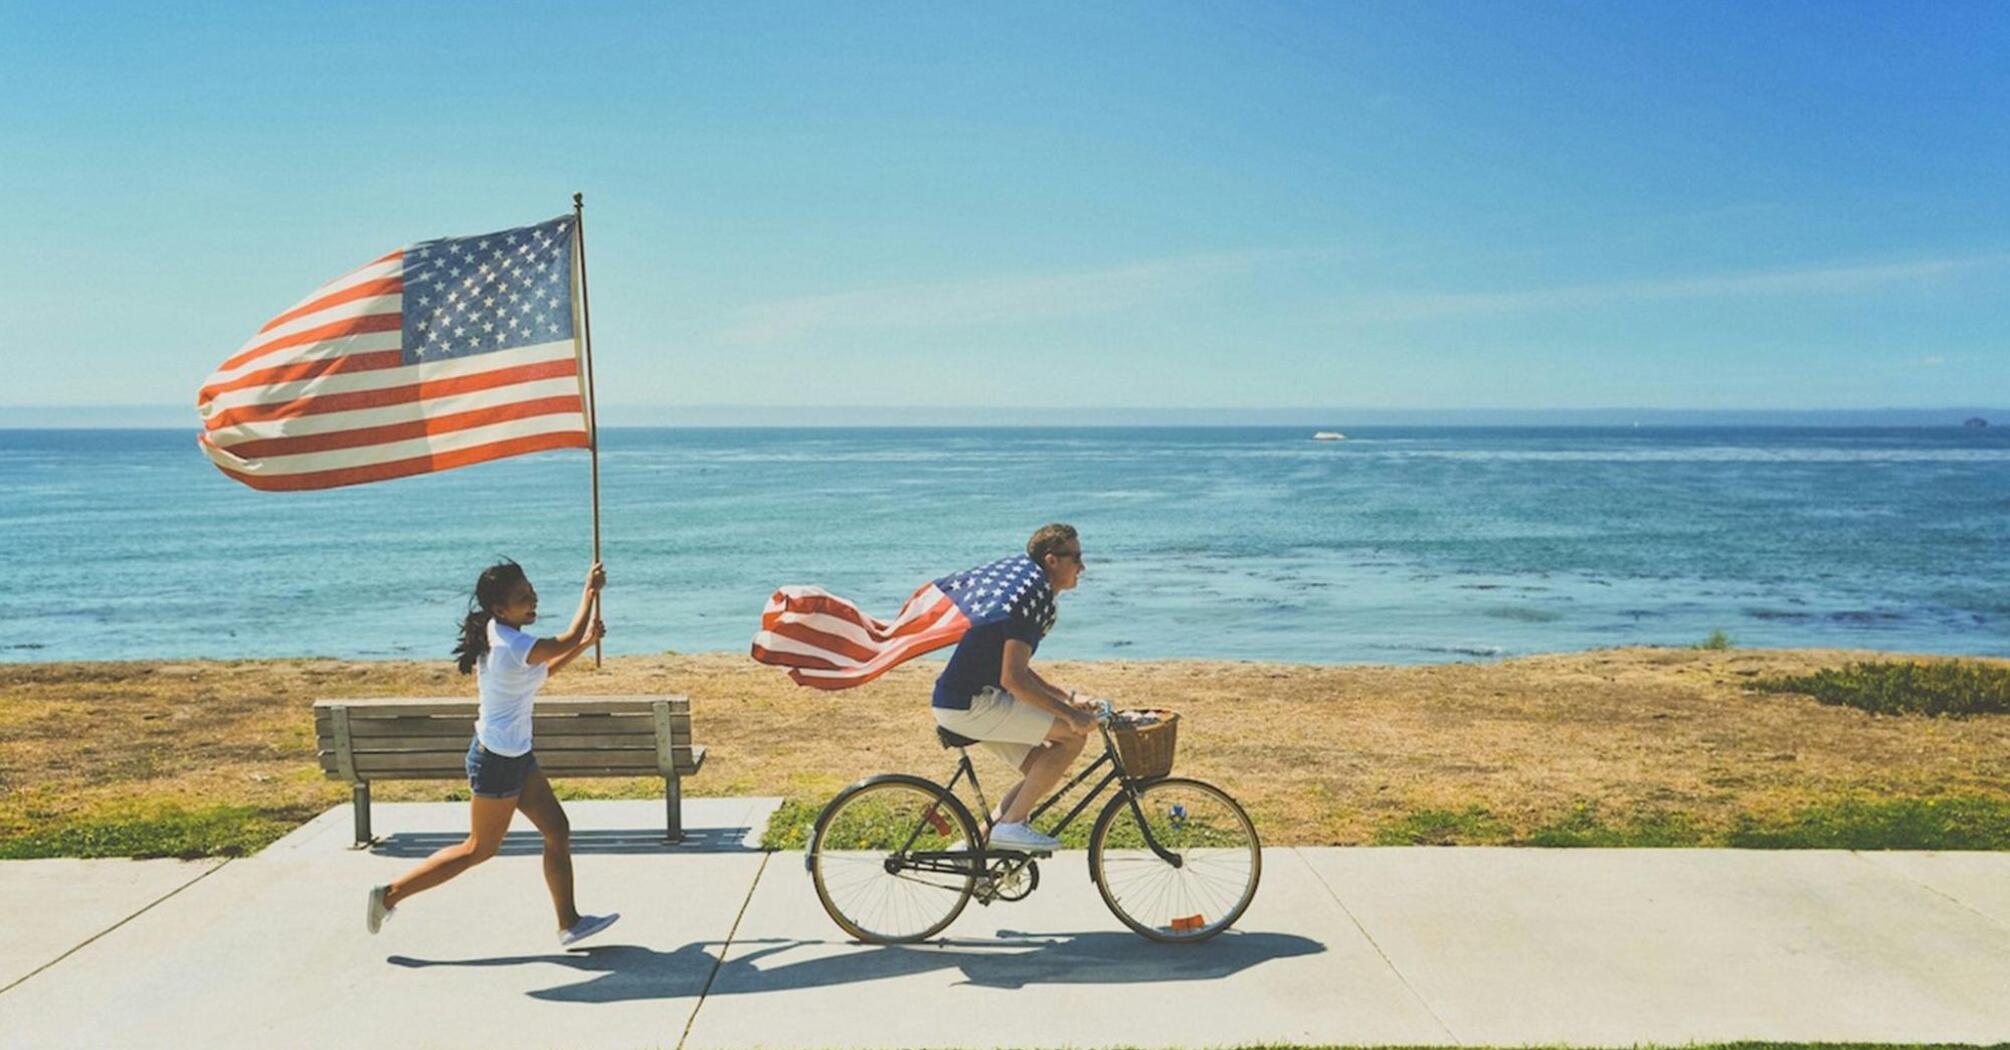 People with US flags celebrating Independence Day on the seashore